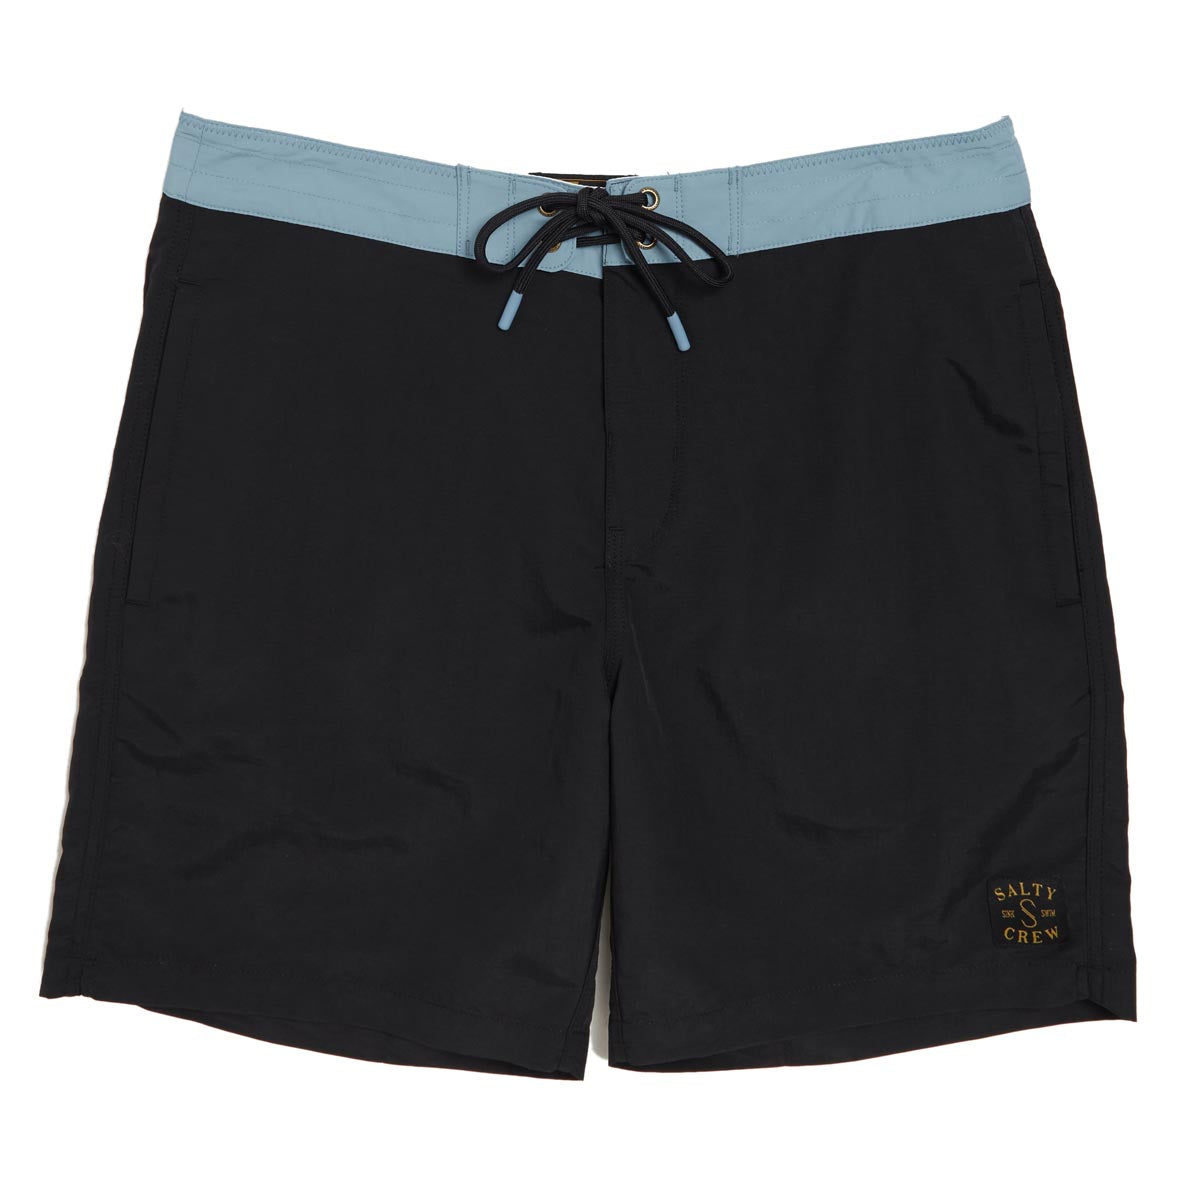 Salty Crew Clubhouse Board Shorts - Black image 1